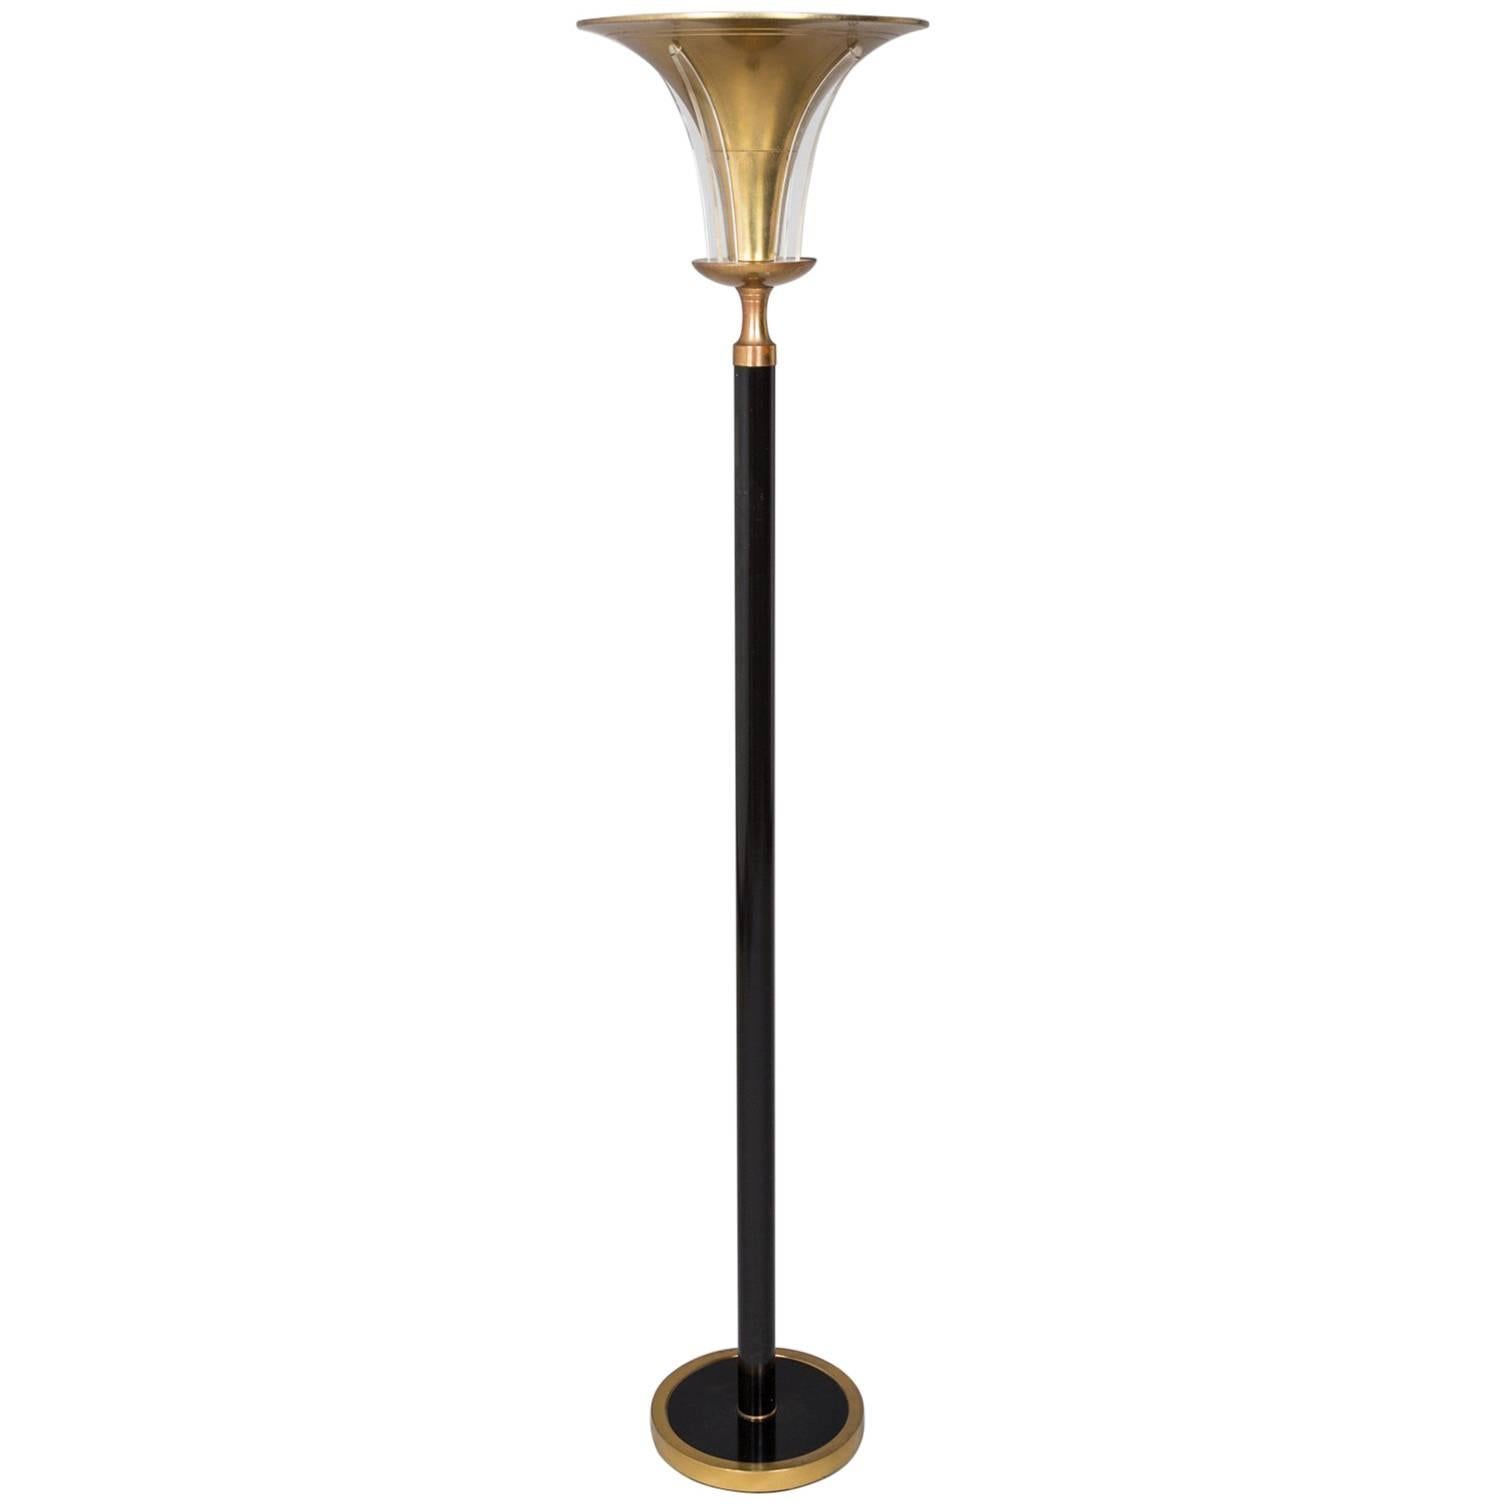 1930s Art Deco Floor Lamp with Acrylic "Wing" Details For Sale